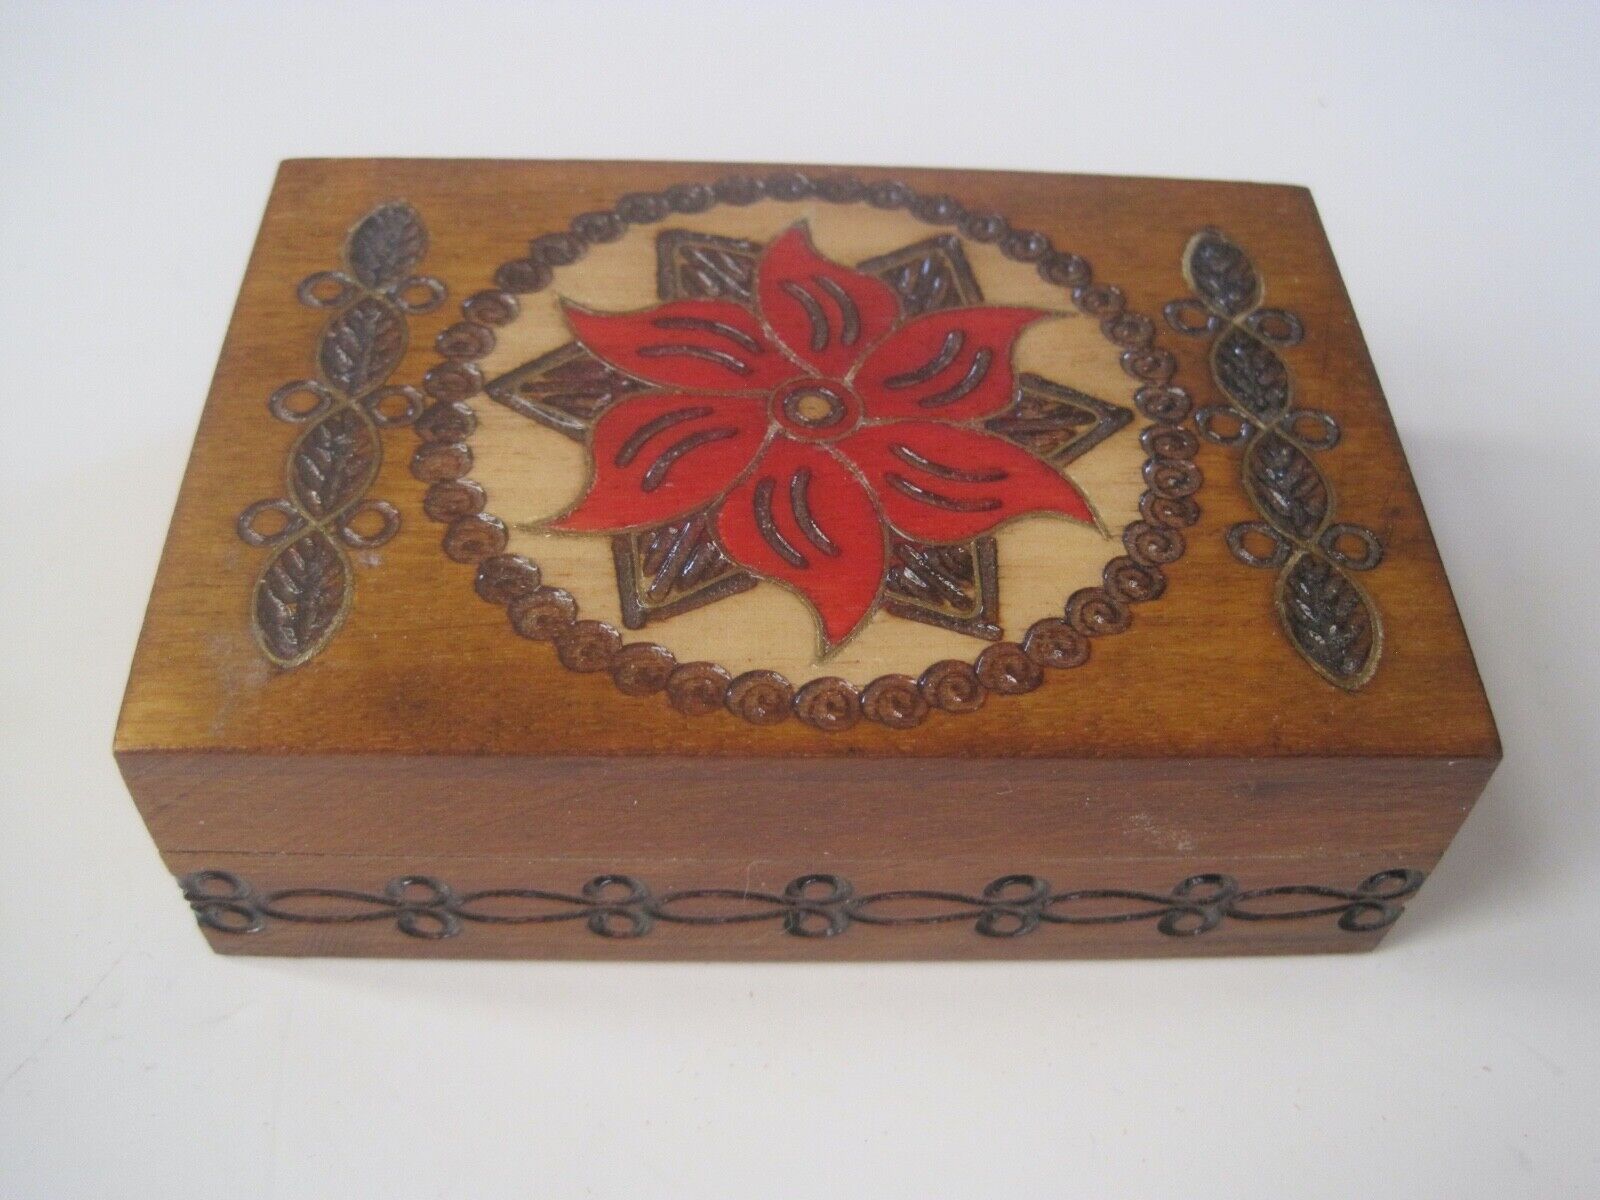 Cheap mail order shopping Poinsettia Wood Austin Mall Box Painted Carved